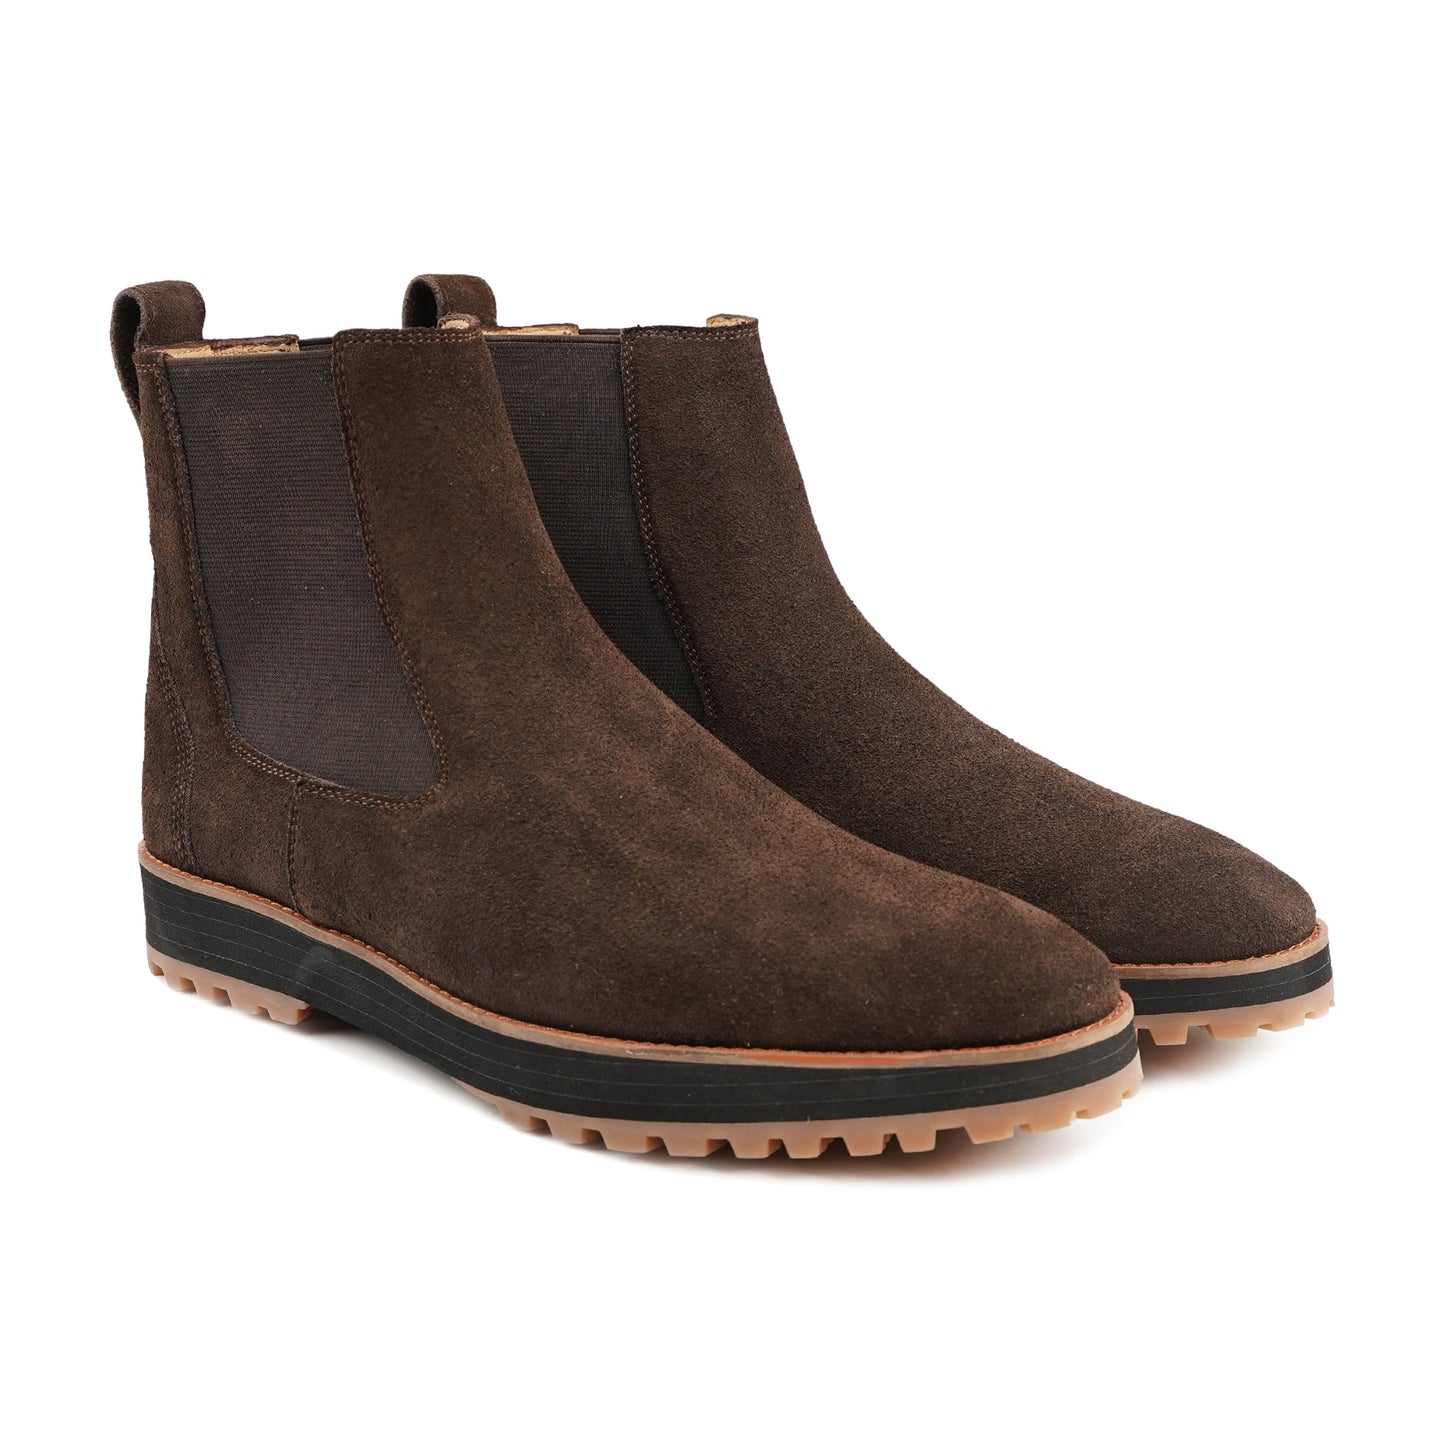 Men's Chelsea Boots Suede | Suede Chelsea Boots Leather Boots